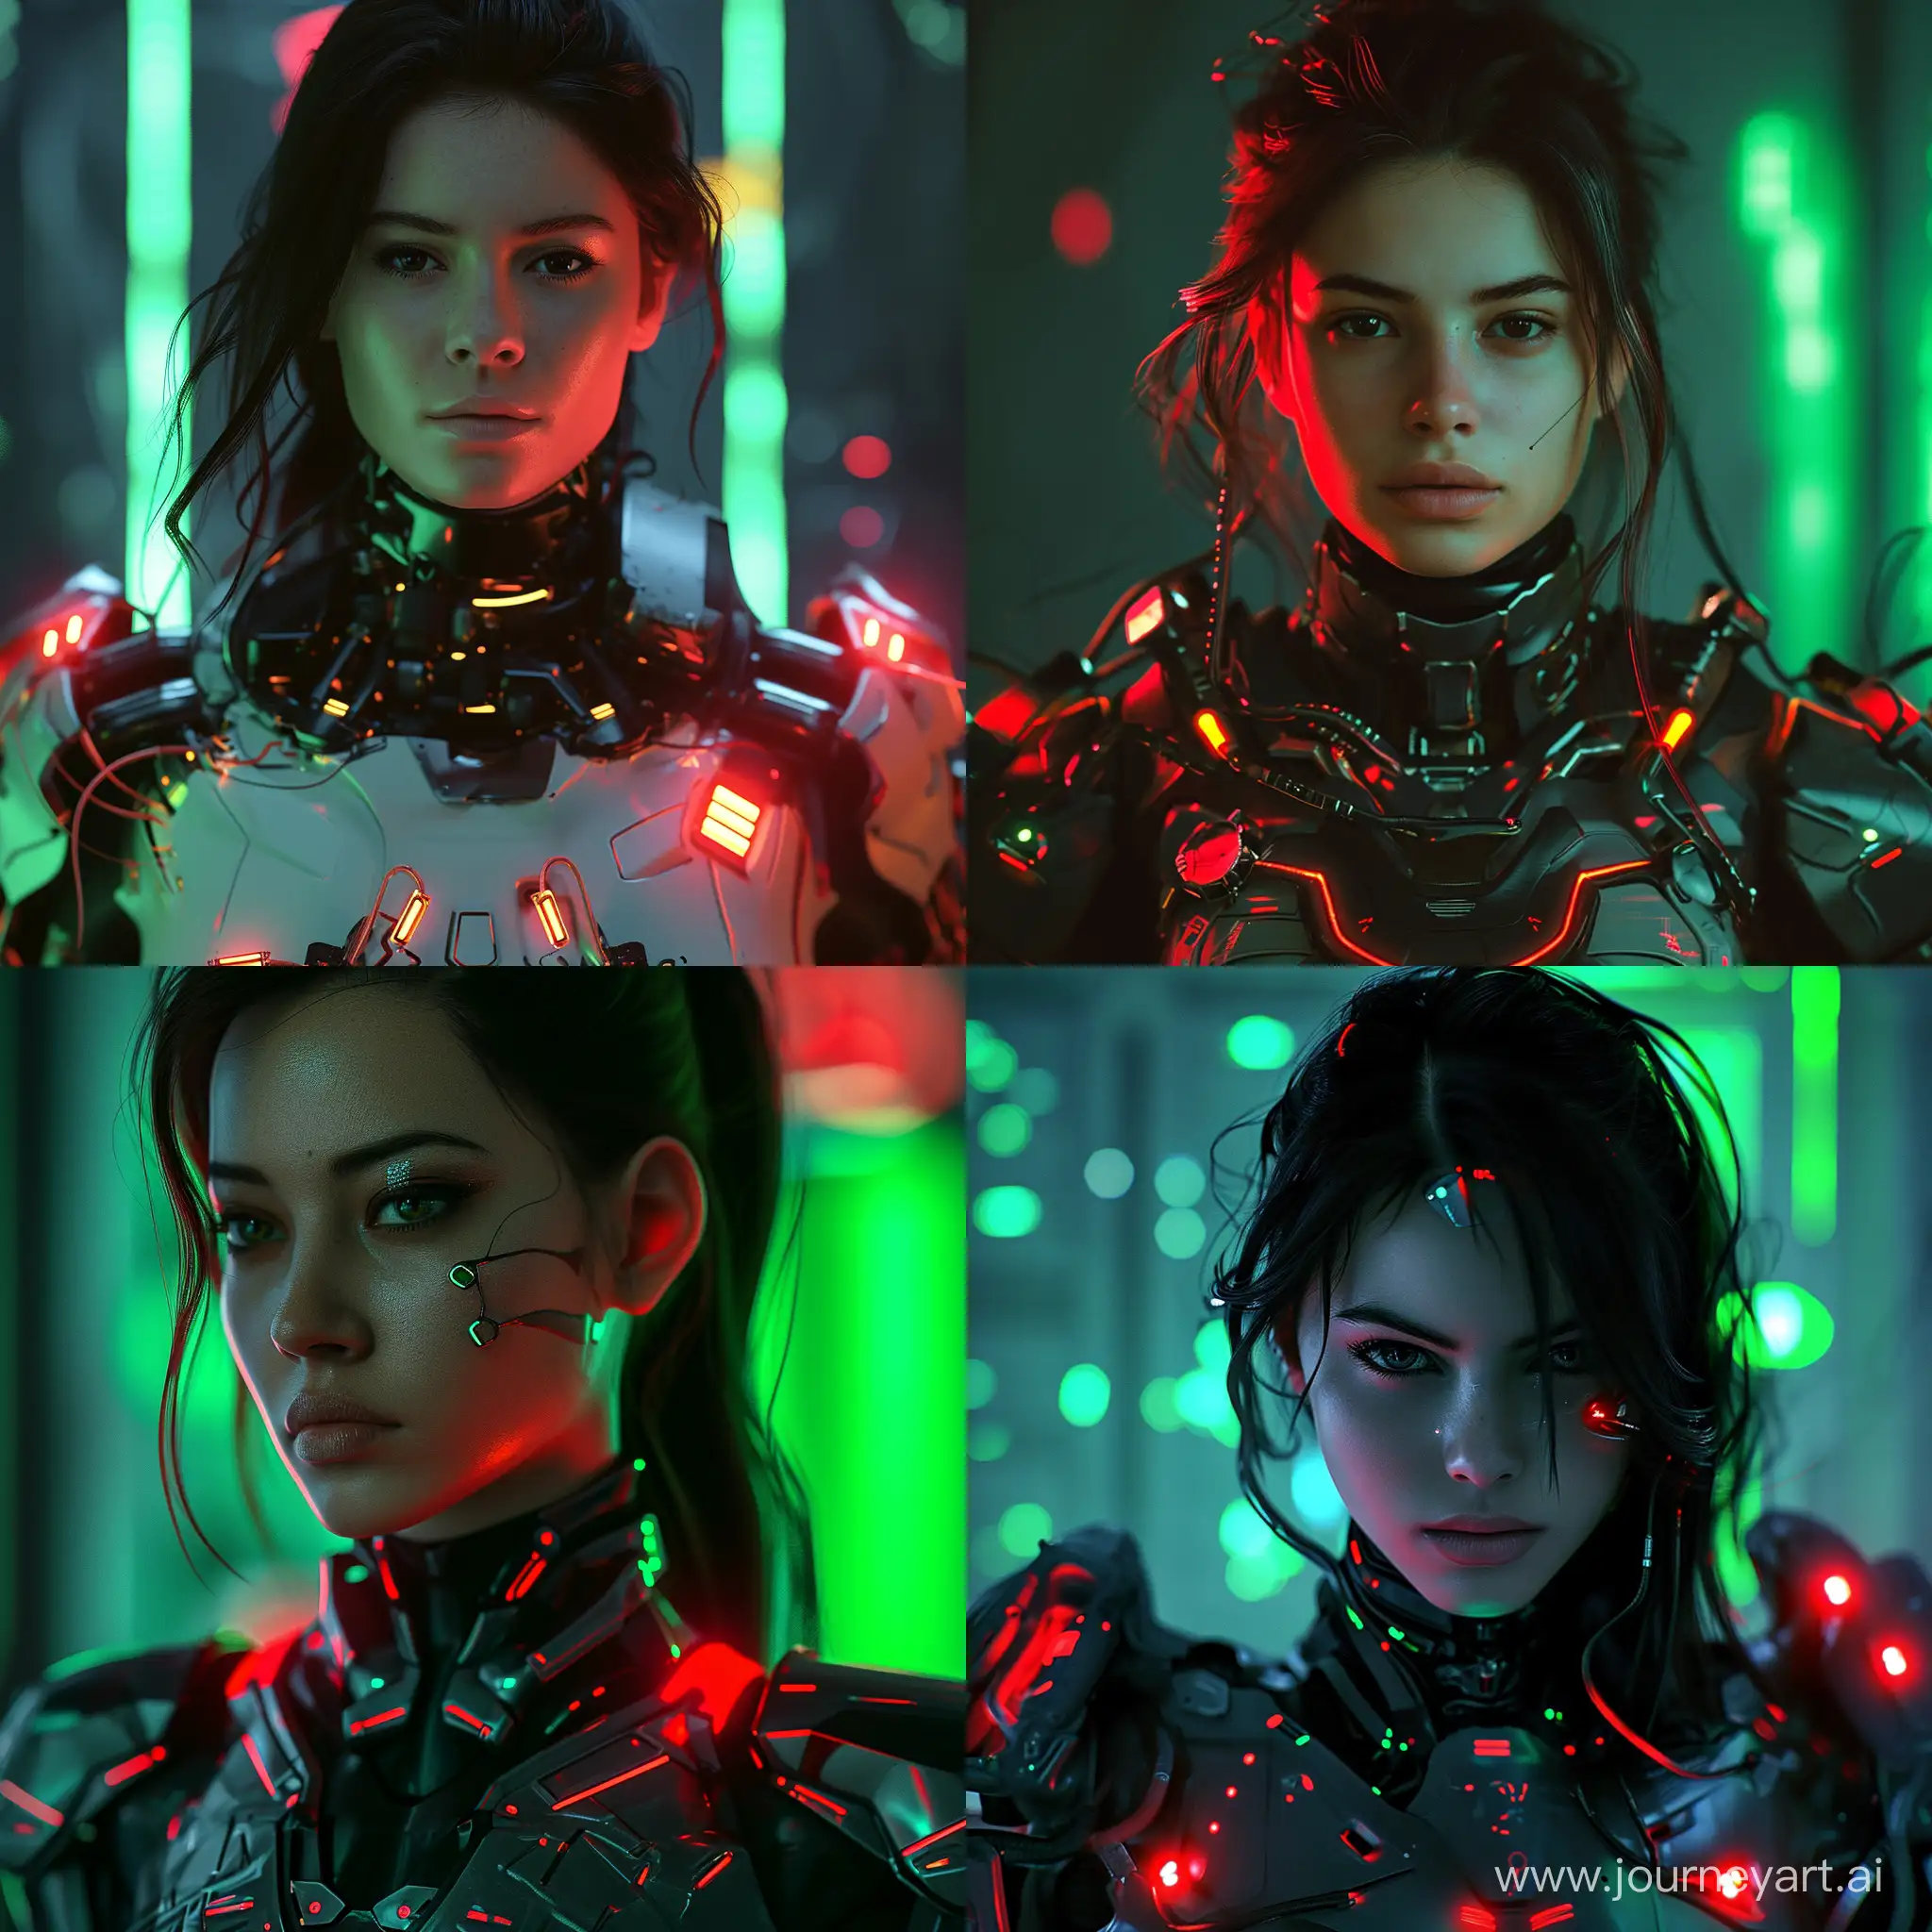 Hyper realistic woman, adult, serious expression, dark hair, sci fi, biomechanical armor suit, beautiful, alien, red and green glowing ambient lights